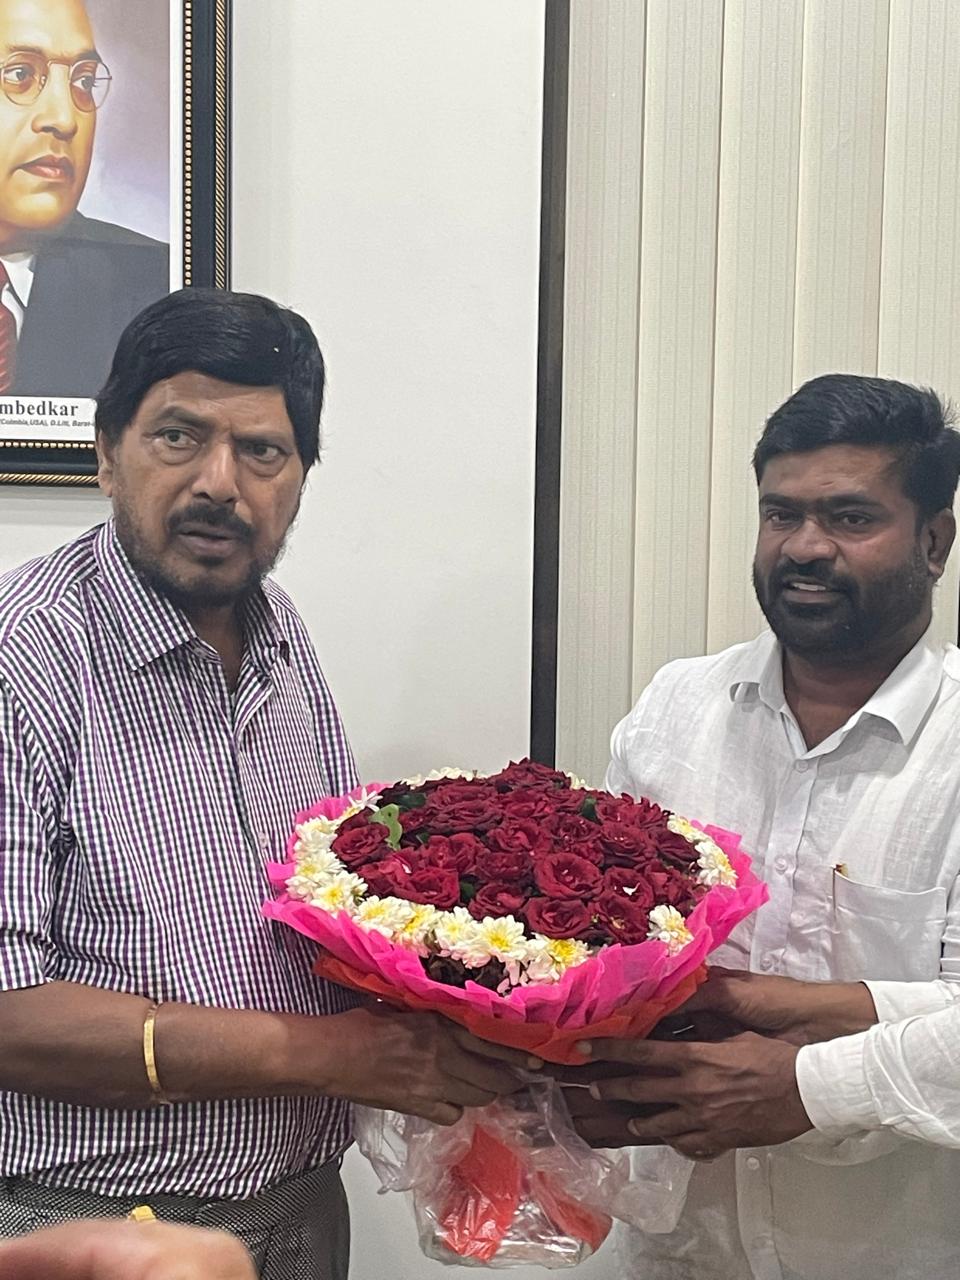 District Leader Satish Malge has been appointed as Secretary of the Republican Party